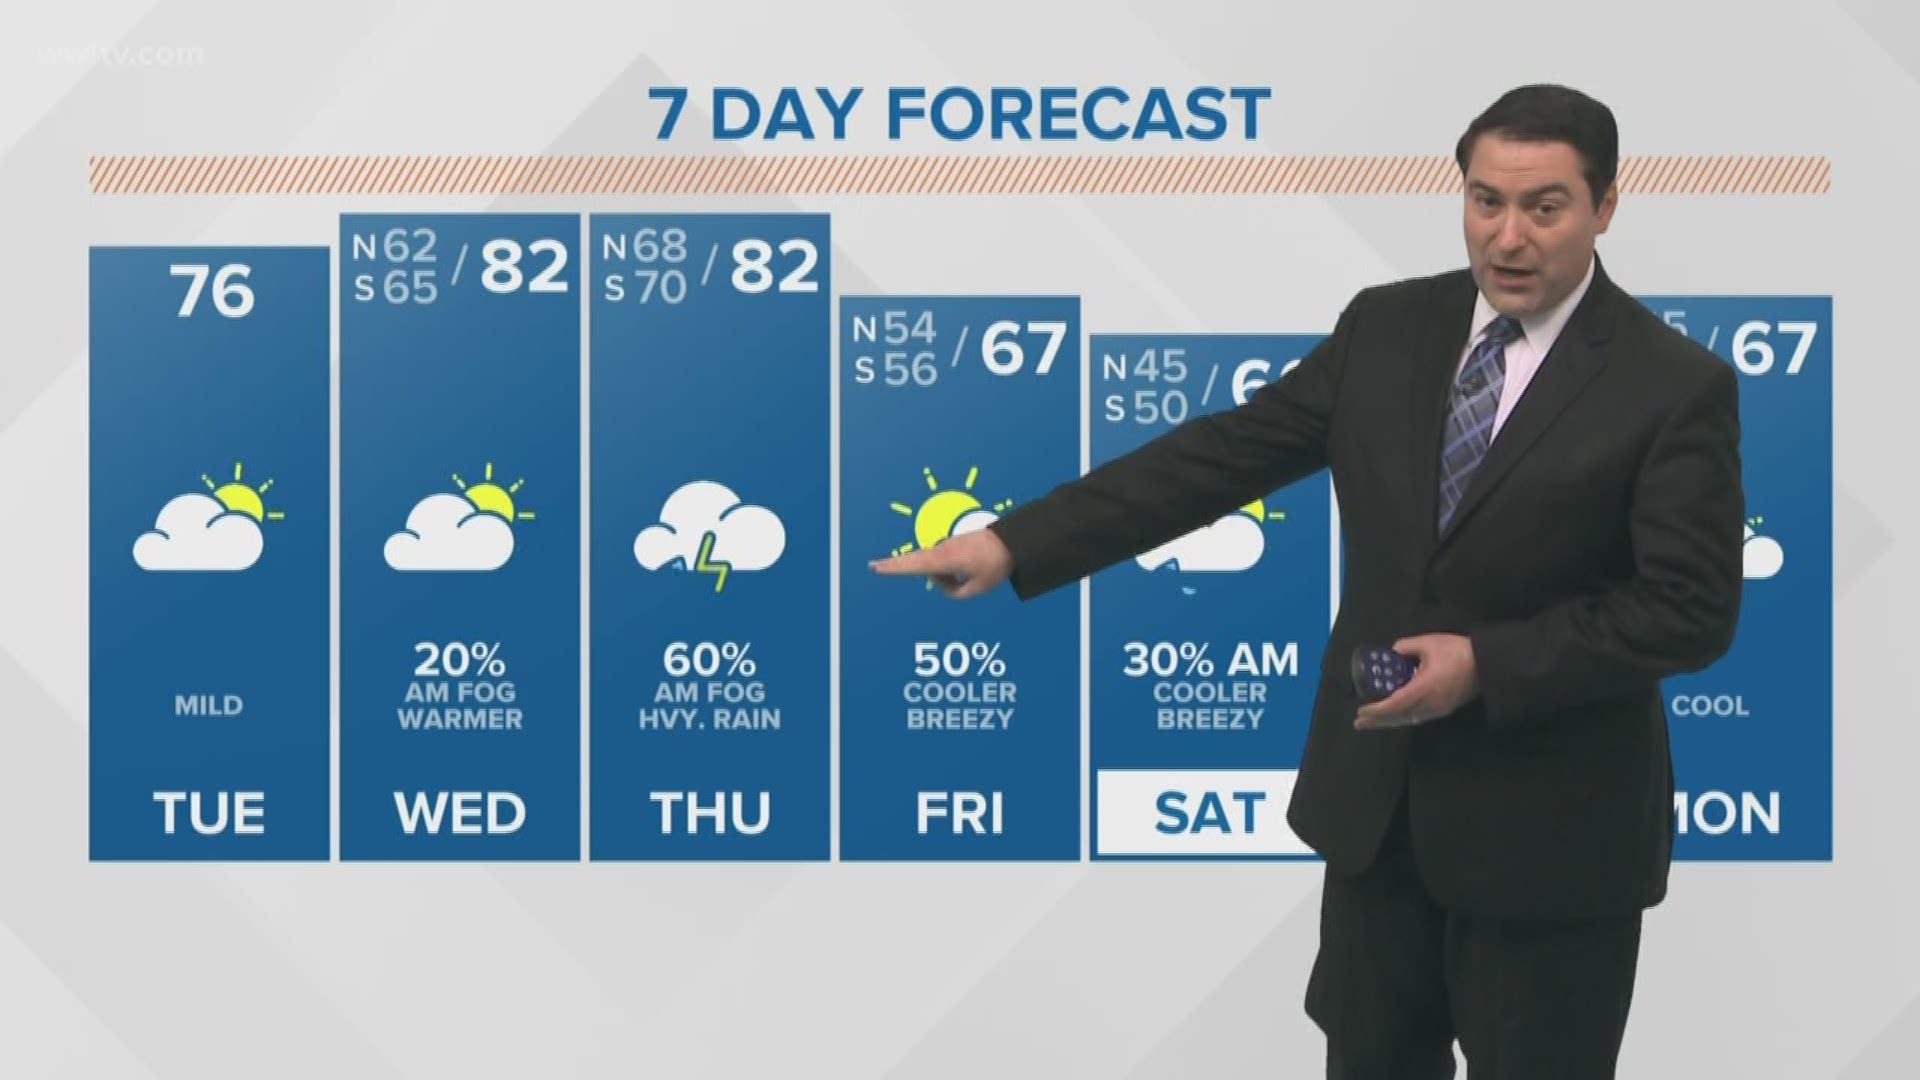 Meteorologist Dave Nussbaum says we will be very mild and dry today in the New Orleans area. A strong cold front arrives Thursday with much cooler temperatures returning on Friday.